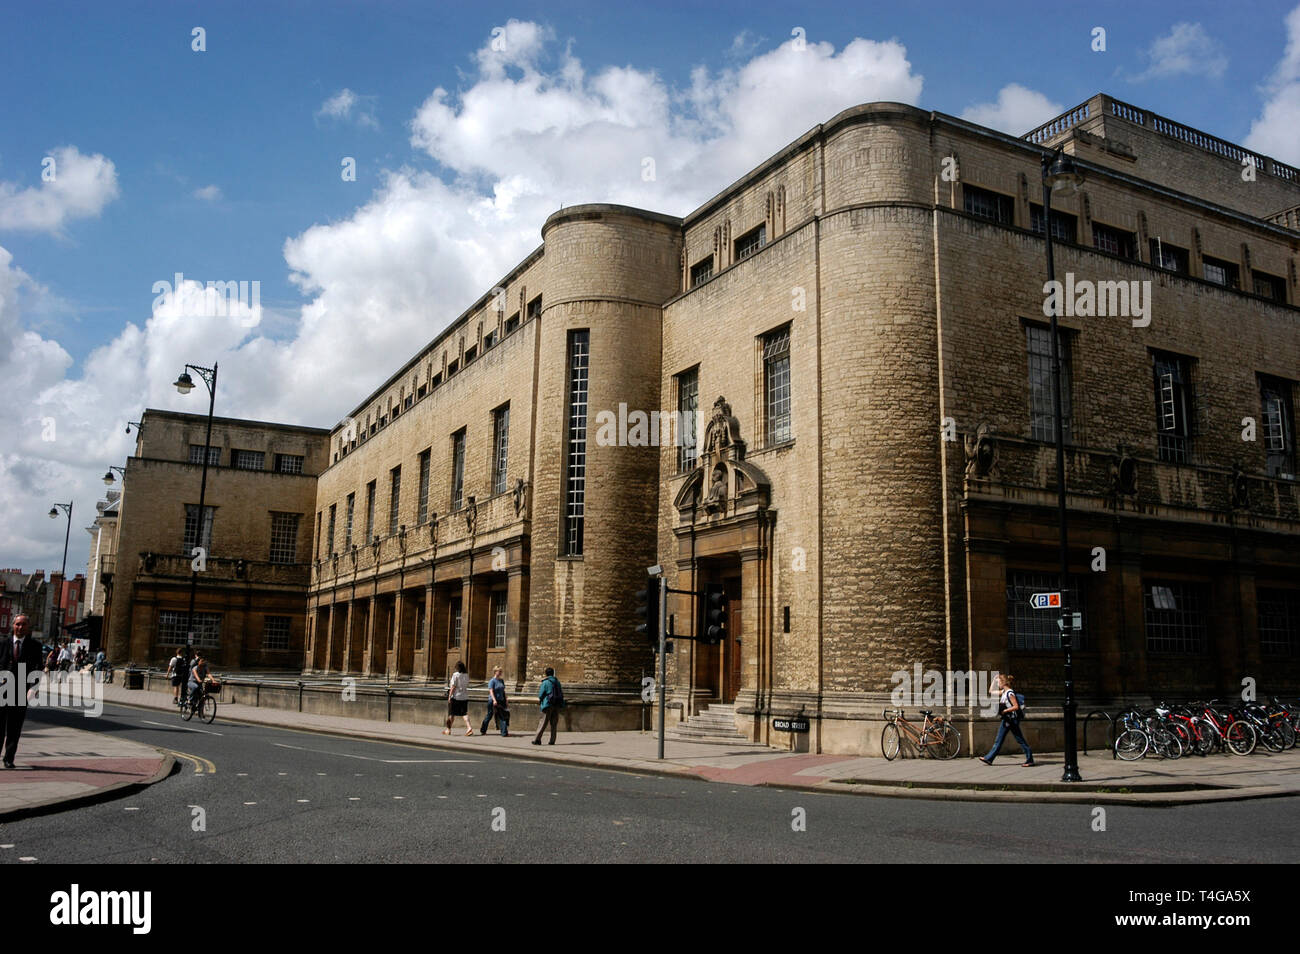 The Weston Library is part of the Bodleian Library, the main research library of the University of Oxford in Broad Street in Oxford, Britain.  The lib Stock Photo